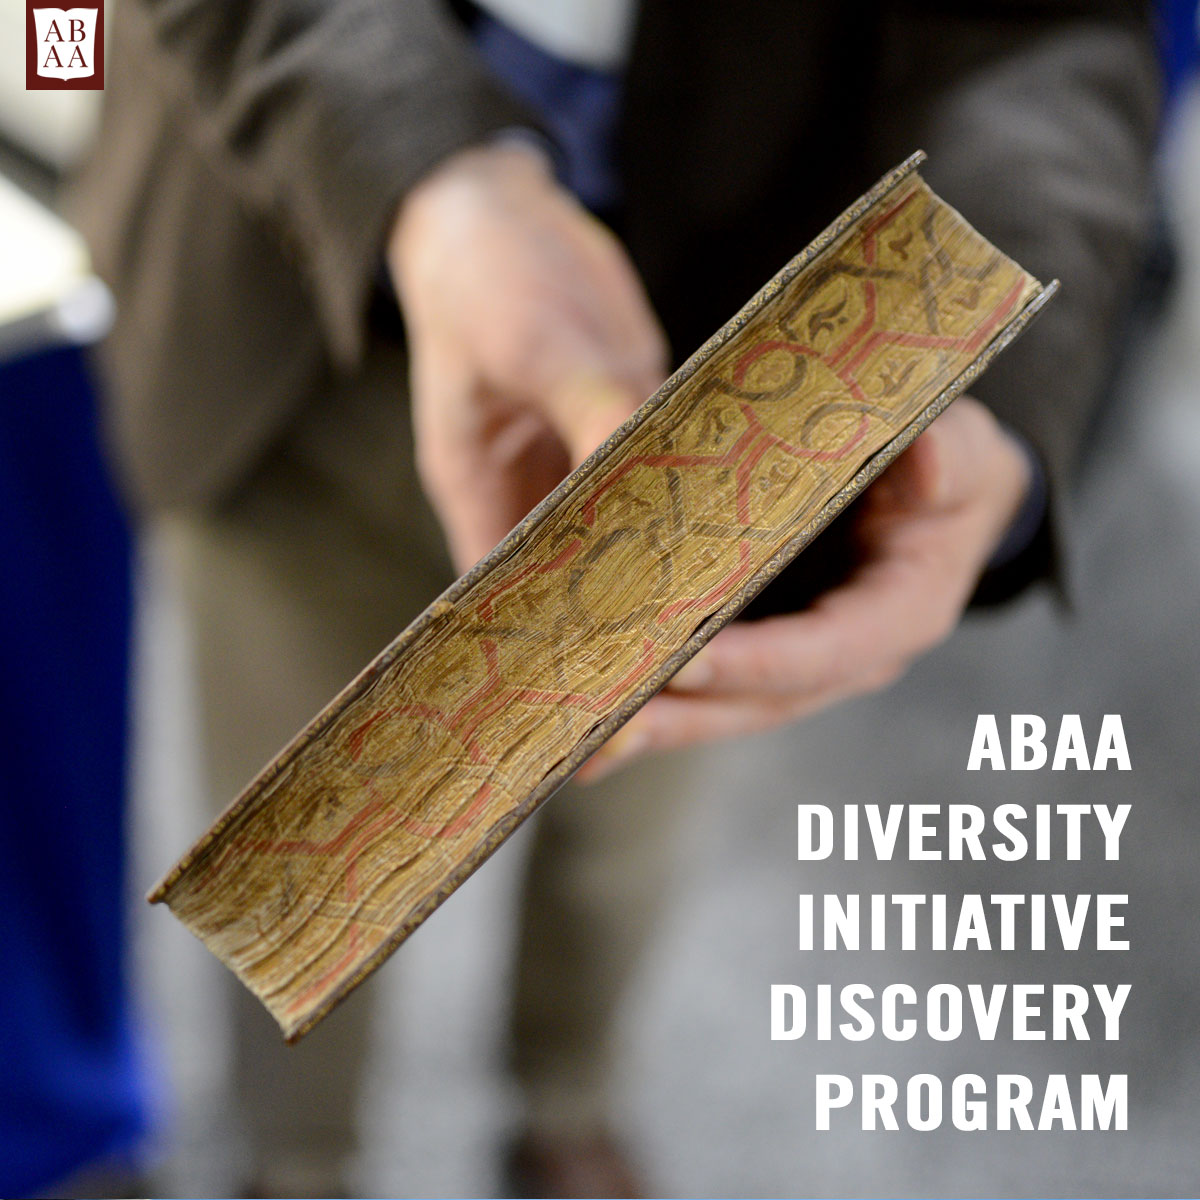 The ABAA is proud to announce the first season of a guided discovery program for those historically underrepresented among workers in the trade—black, indigenous, people of color, & the LGBTQ+ community. 

For more details & to apply, visit: abaa.org/blog/post/abaa…

#RareBooks